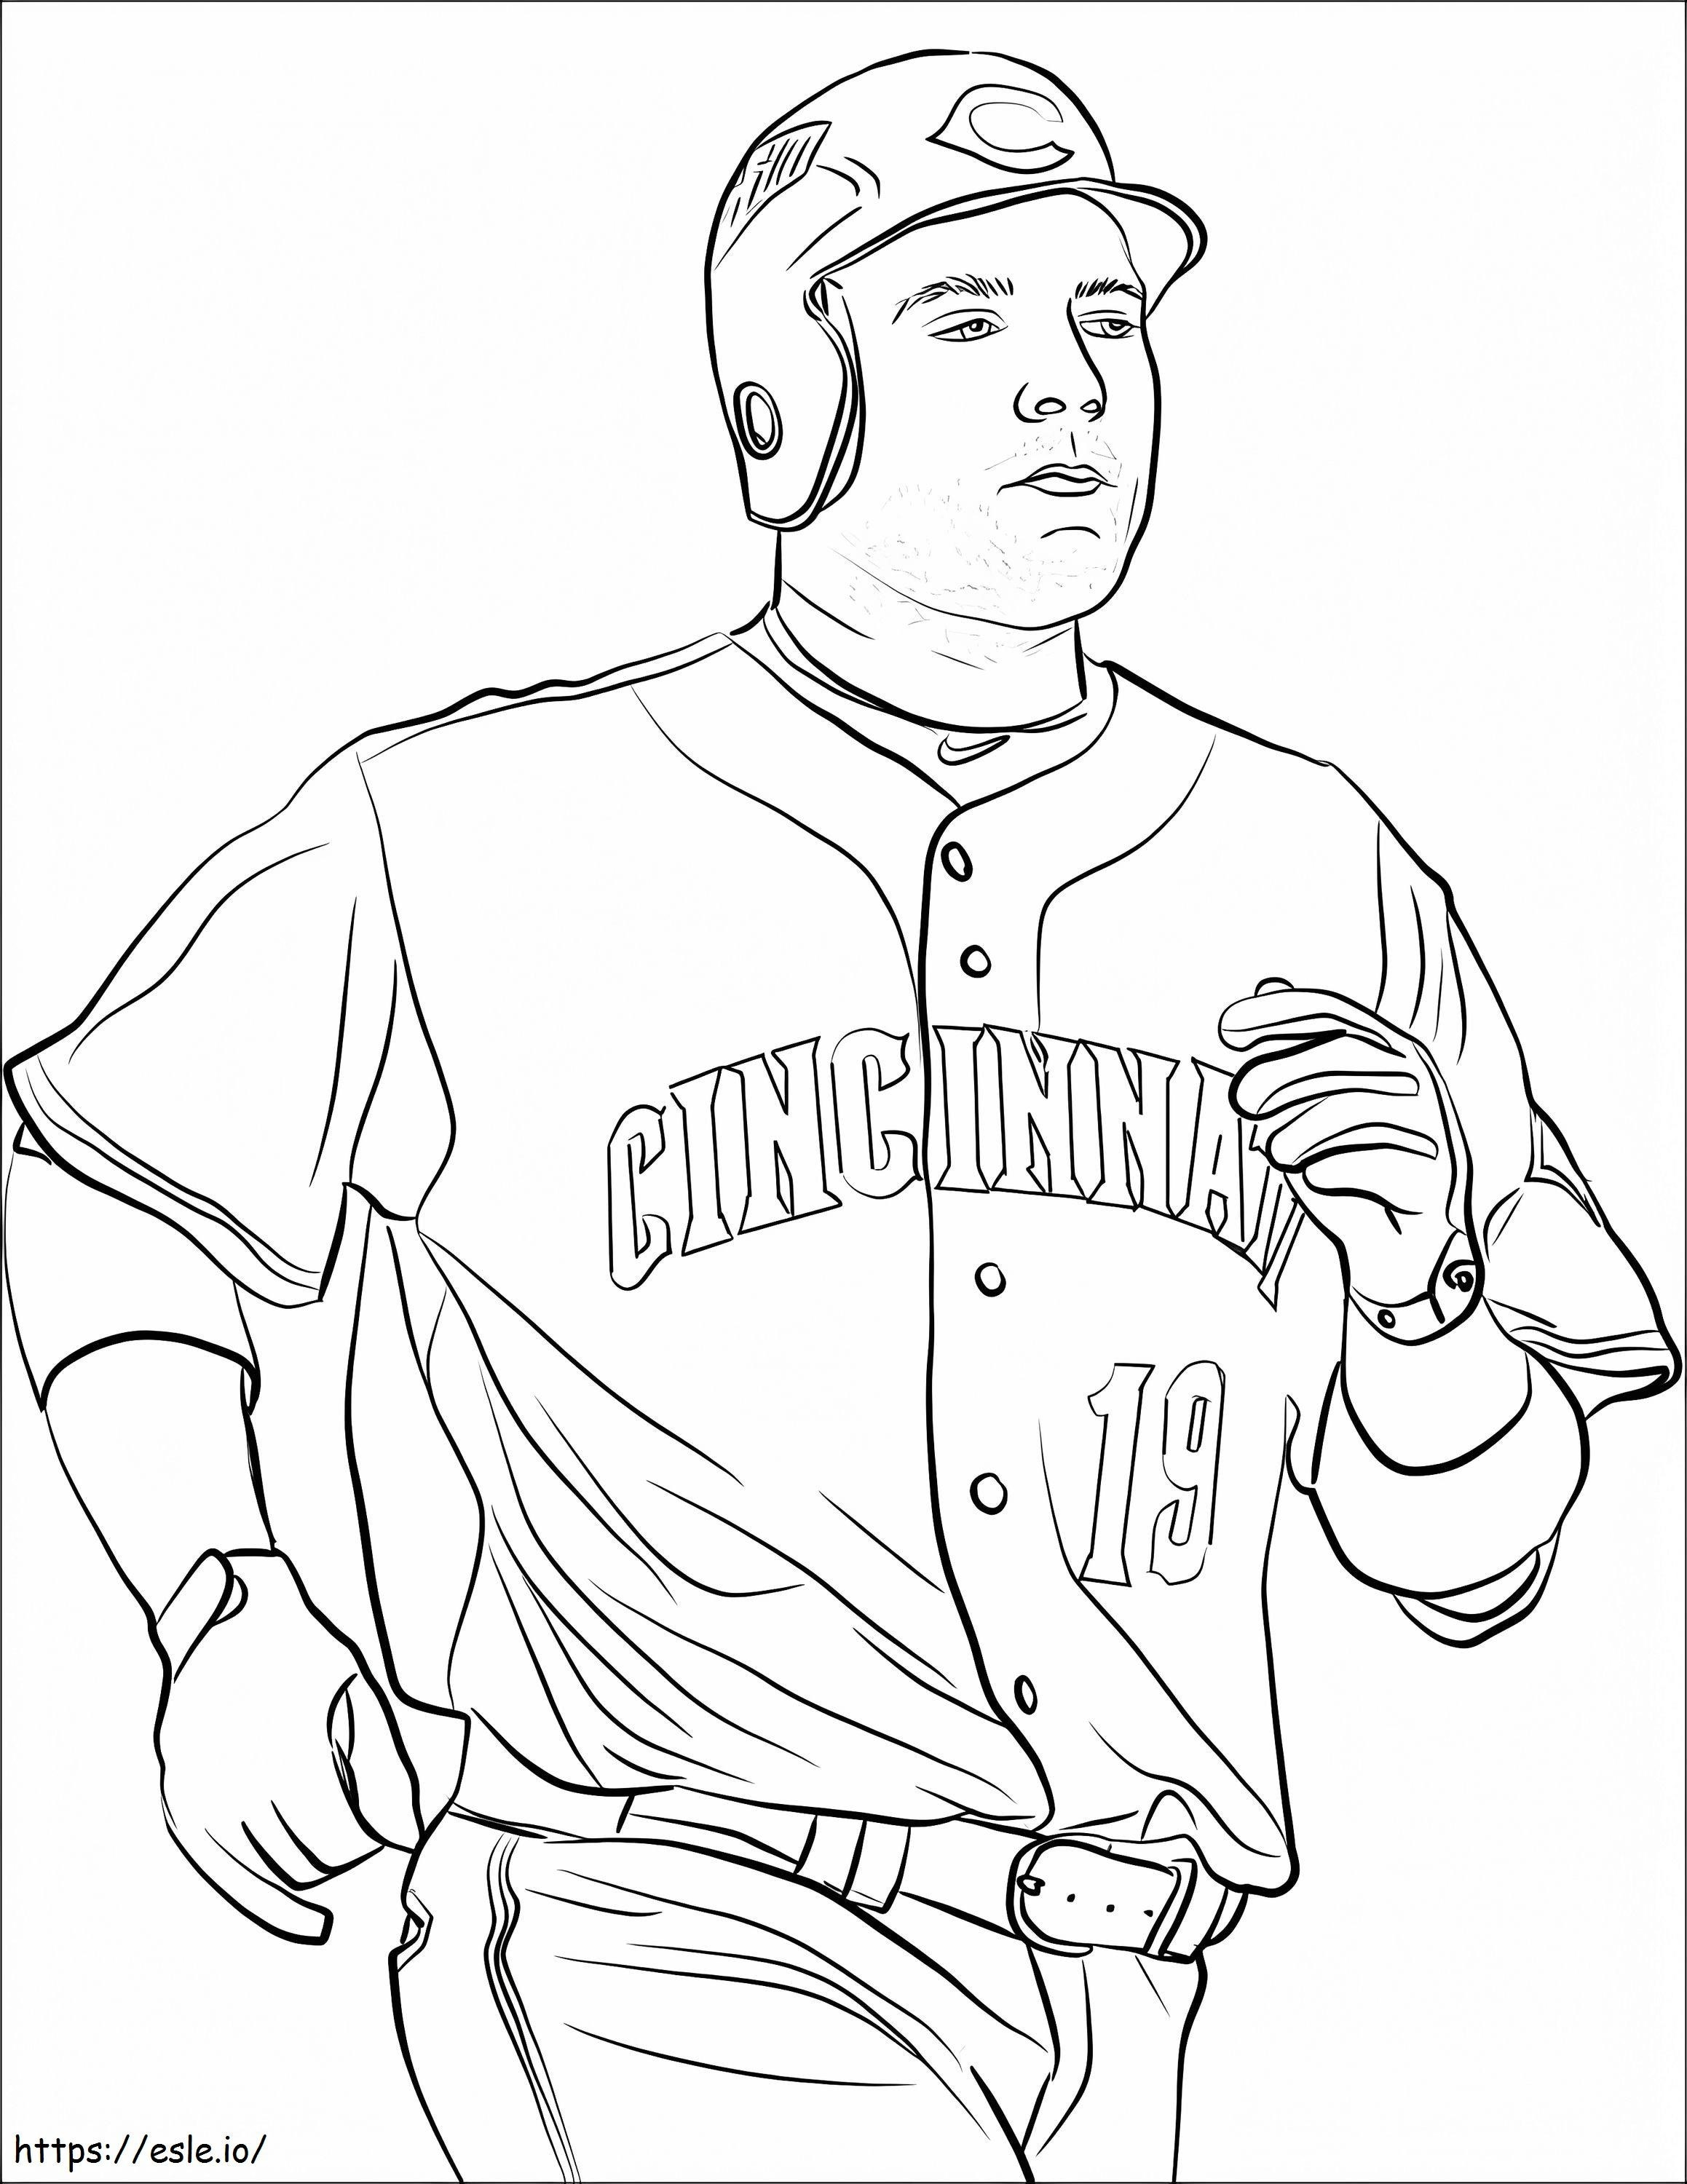 Joey Votto coloring page